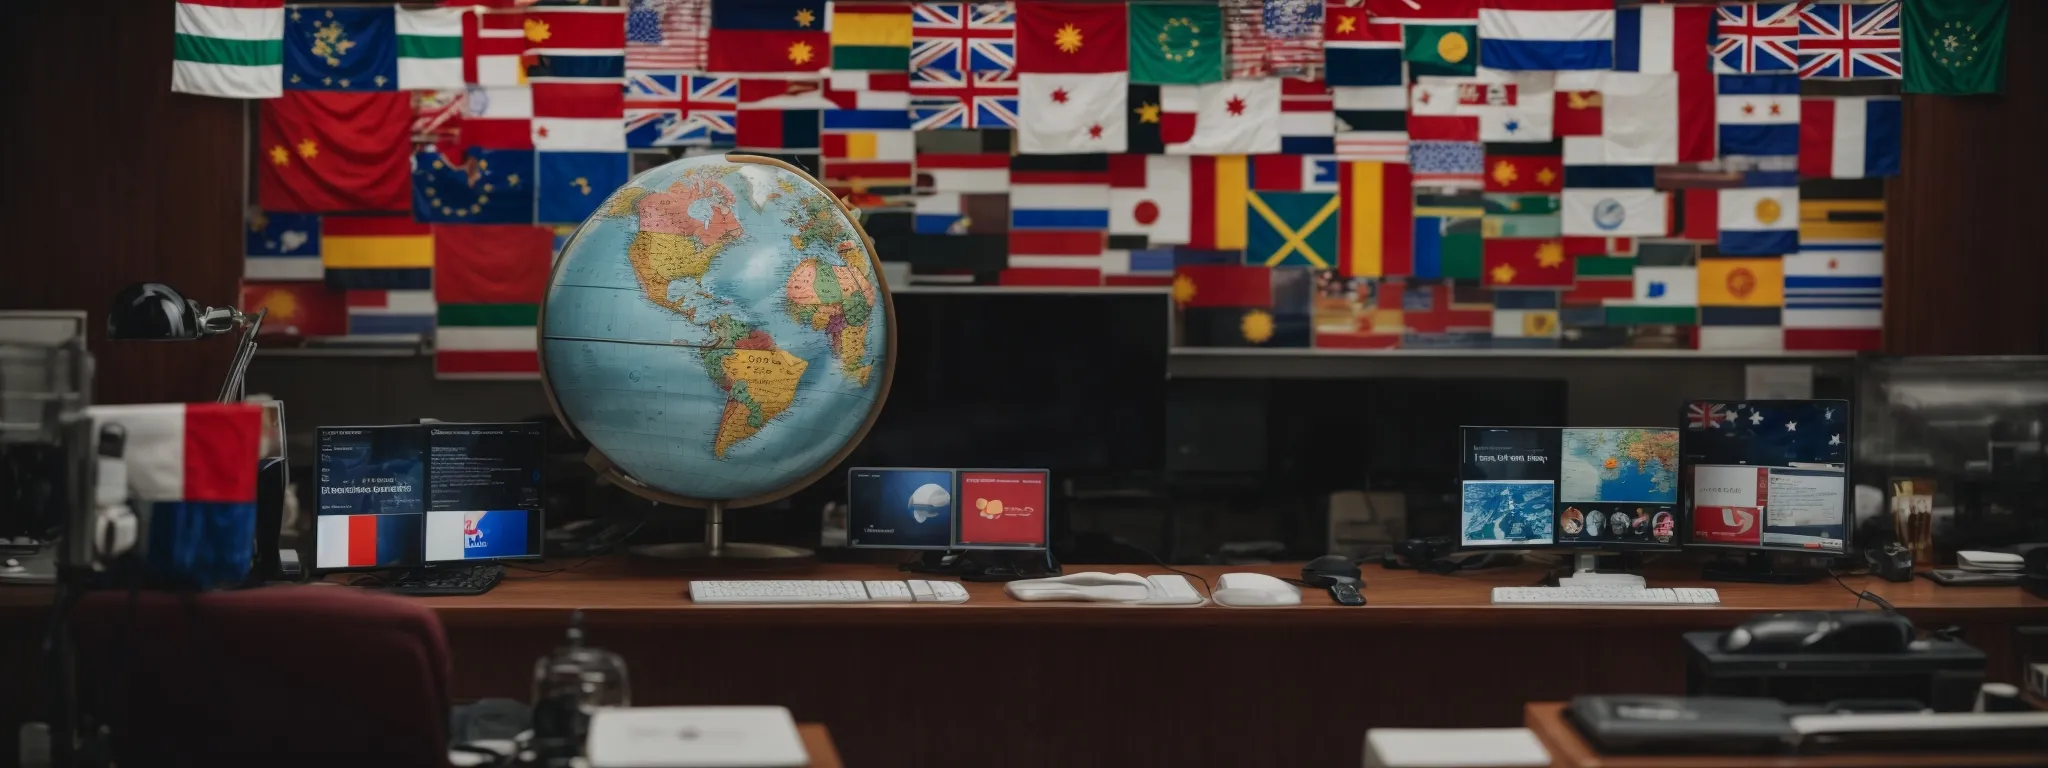 a globe surrounded by multiple flags with a computer screen displaying a translation feature in the background.